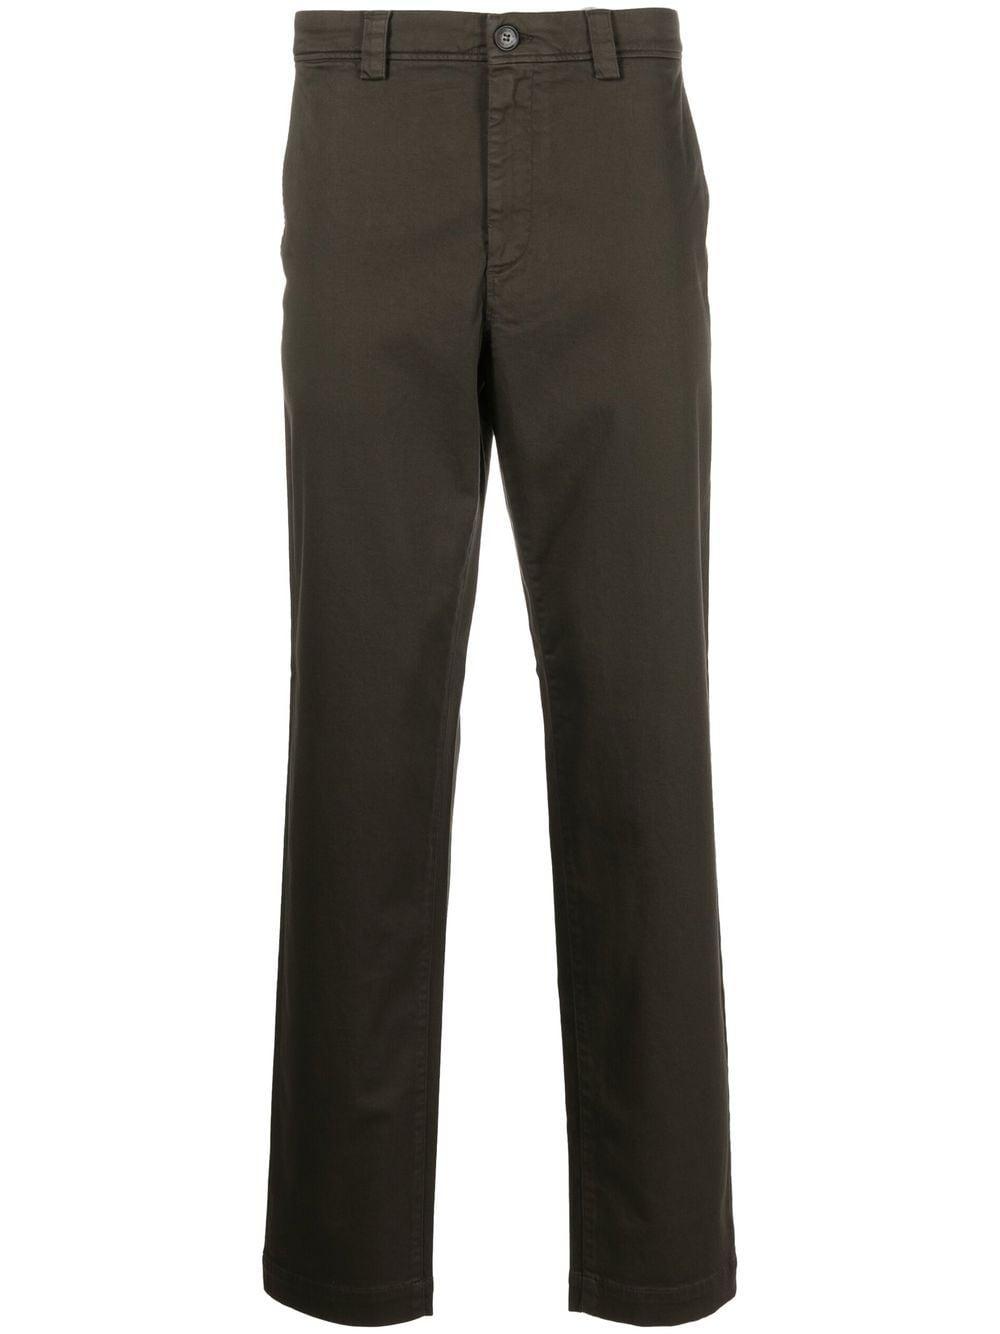 Woolrich American Cotton Chino Pant in Grey_shadow Slacks and Chinos Woolrich Trousers for Men Grey Slacks and Chinos Mens Trousers 